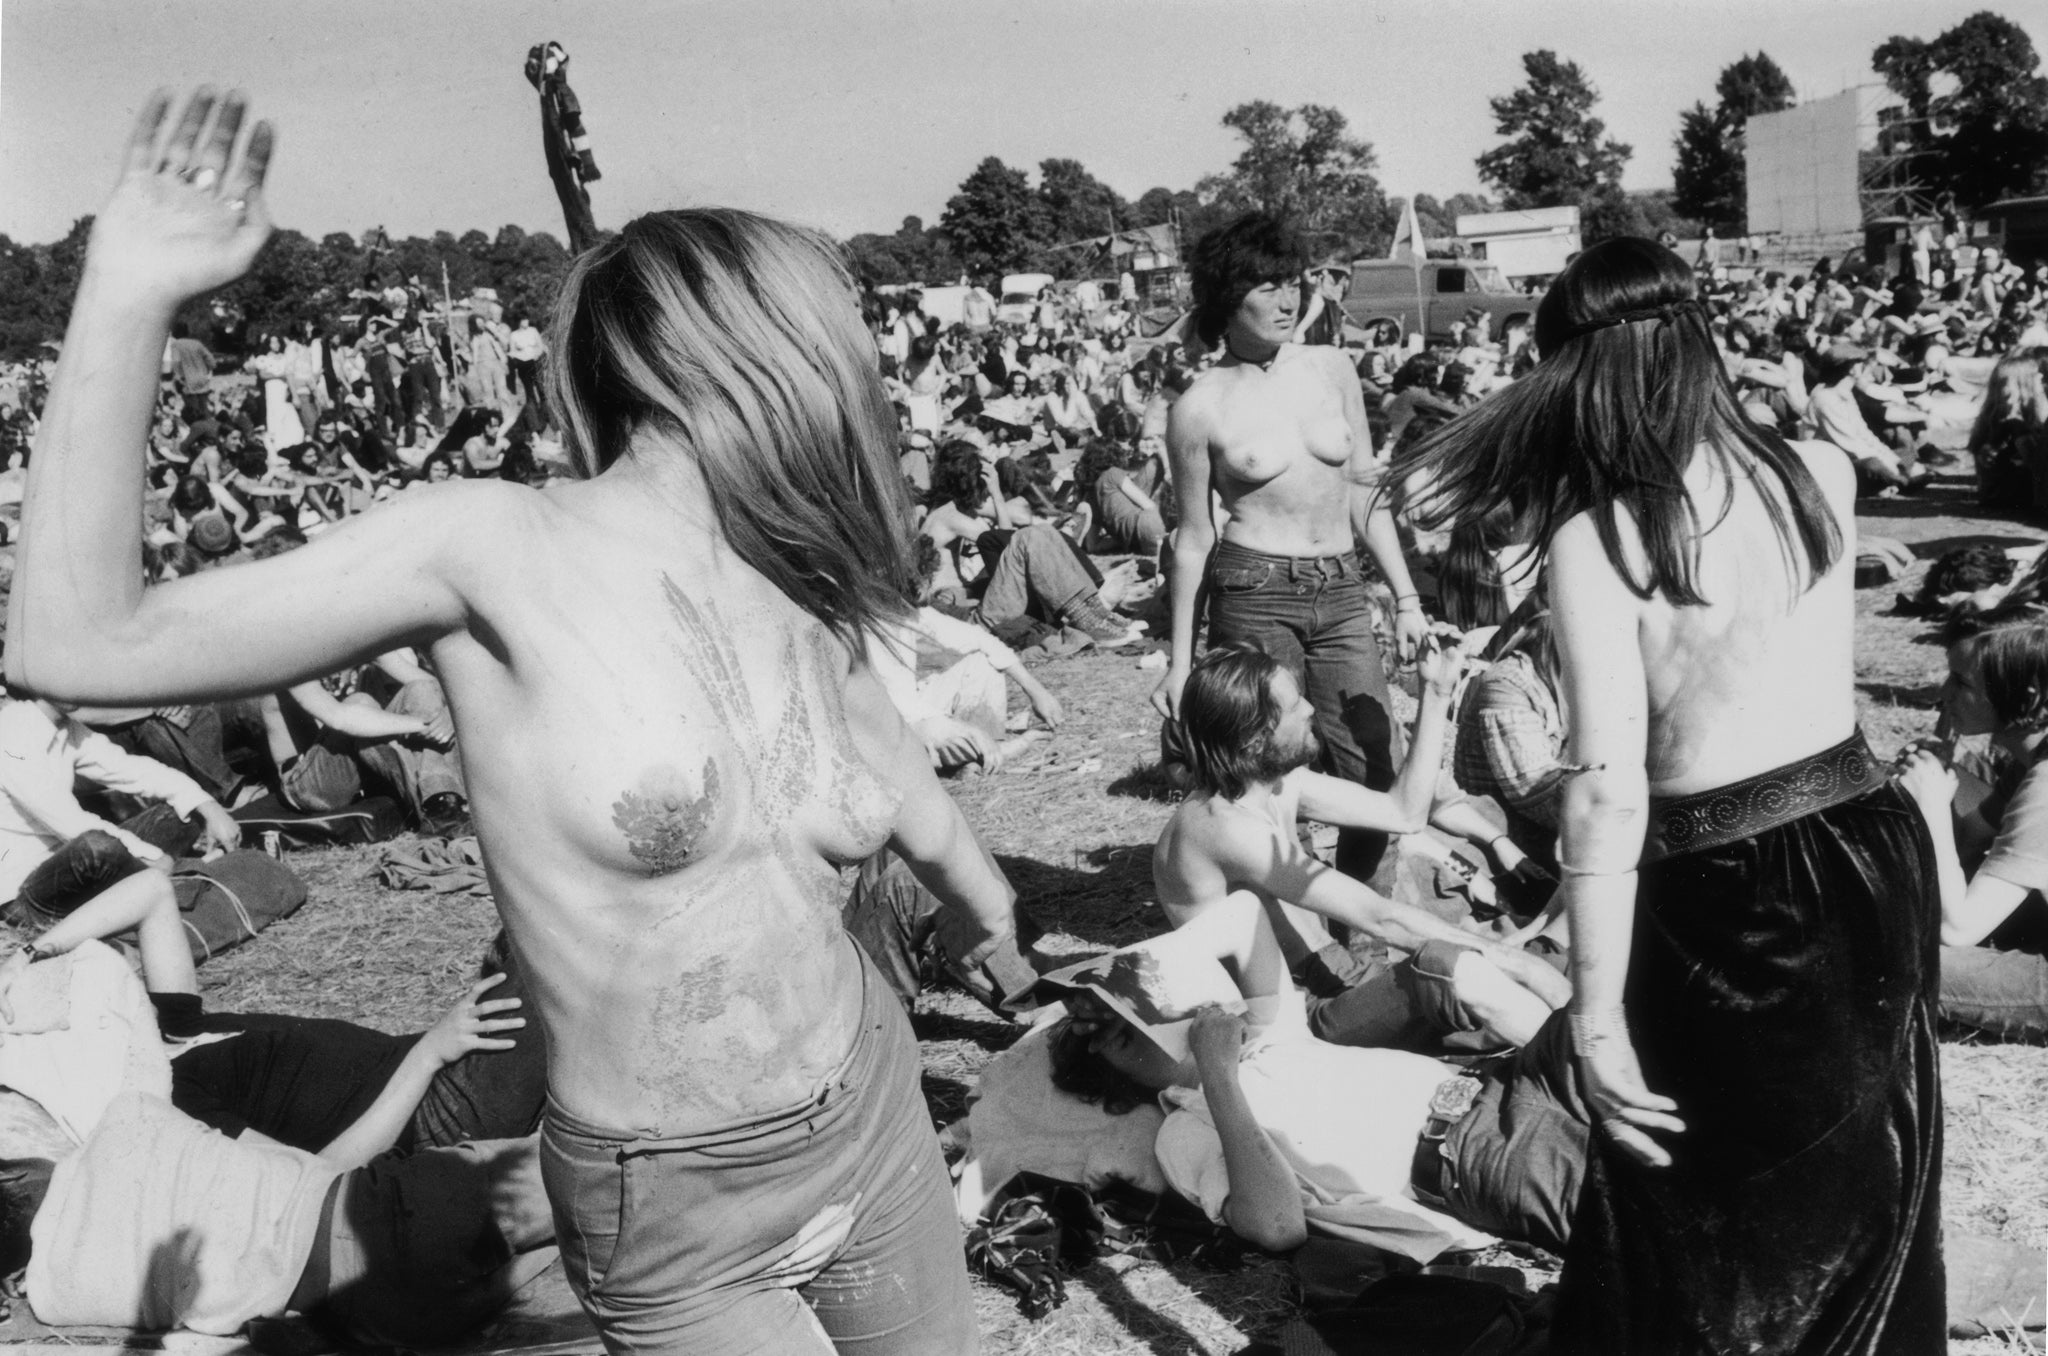 Topless hippies enjoying the sunshine at the second Glastonbury fayre, organised by Arabella Churchill and Andrew Kerr at Worthy Farm, Pilton, Somerset, 1971